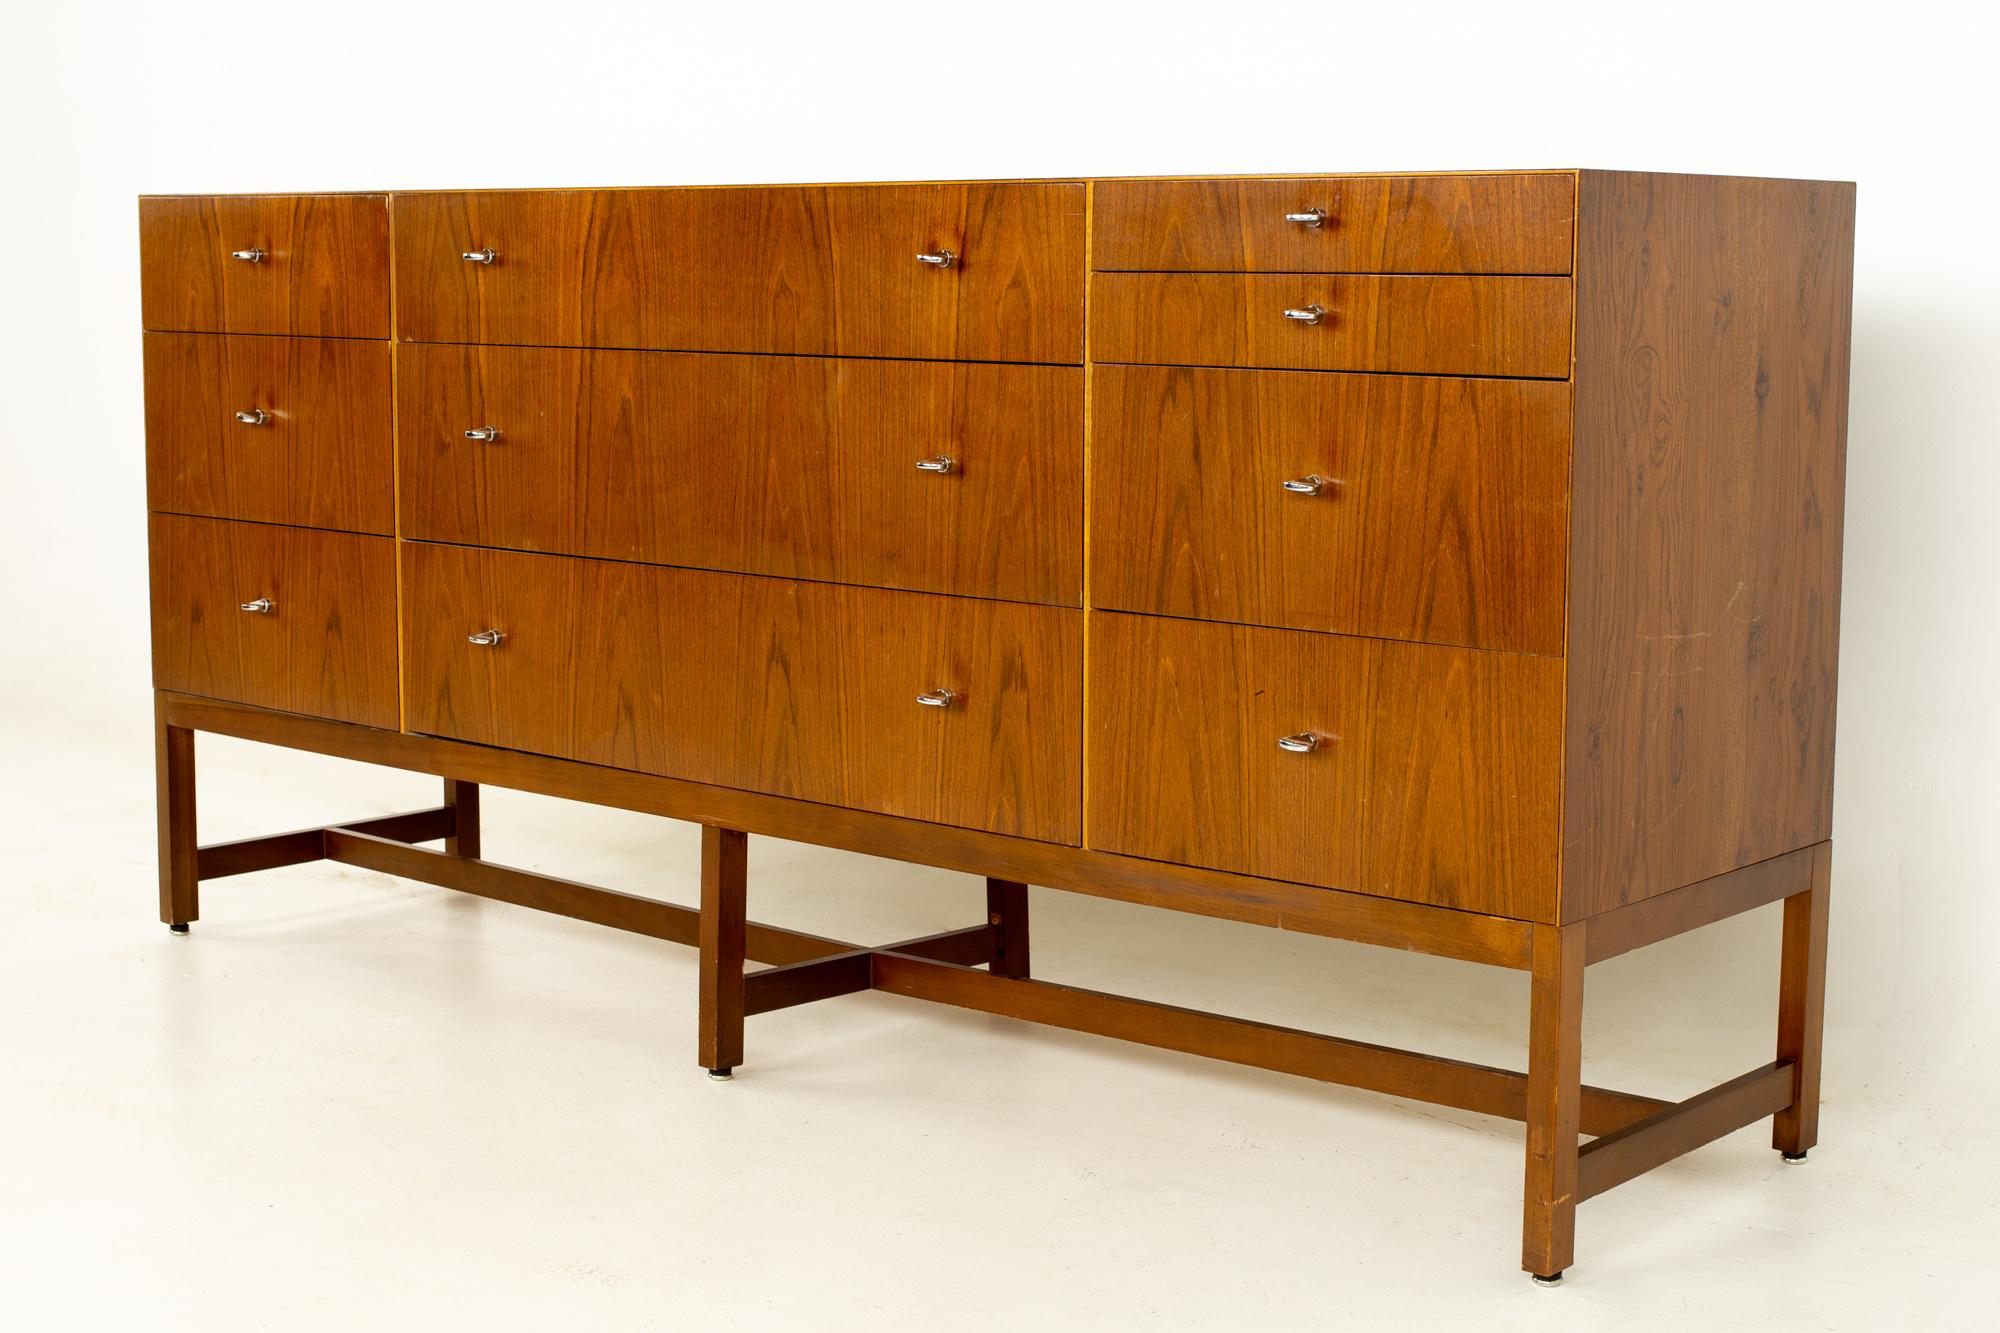 Directional Mid Century walnut and chrome lowboy dresser
This dresser measures: 72 wide x 19.5 deep x 33.5 inches high
All pieces of furniture can be had in what we call restored vintage condition. That means the piece is restored upon purchase so